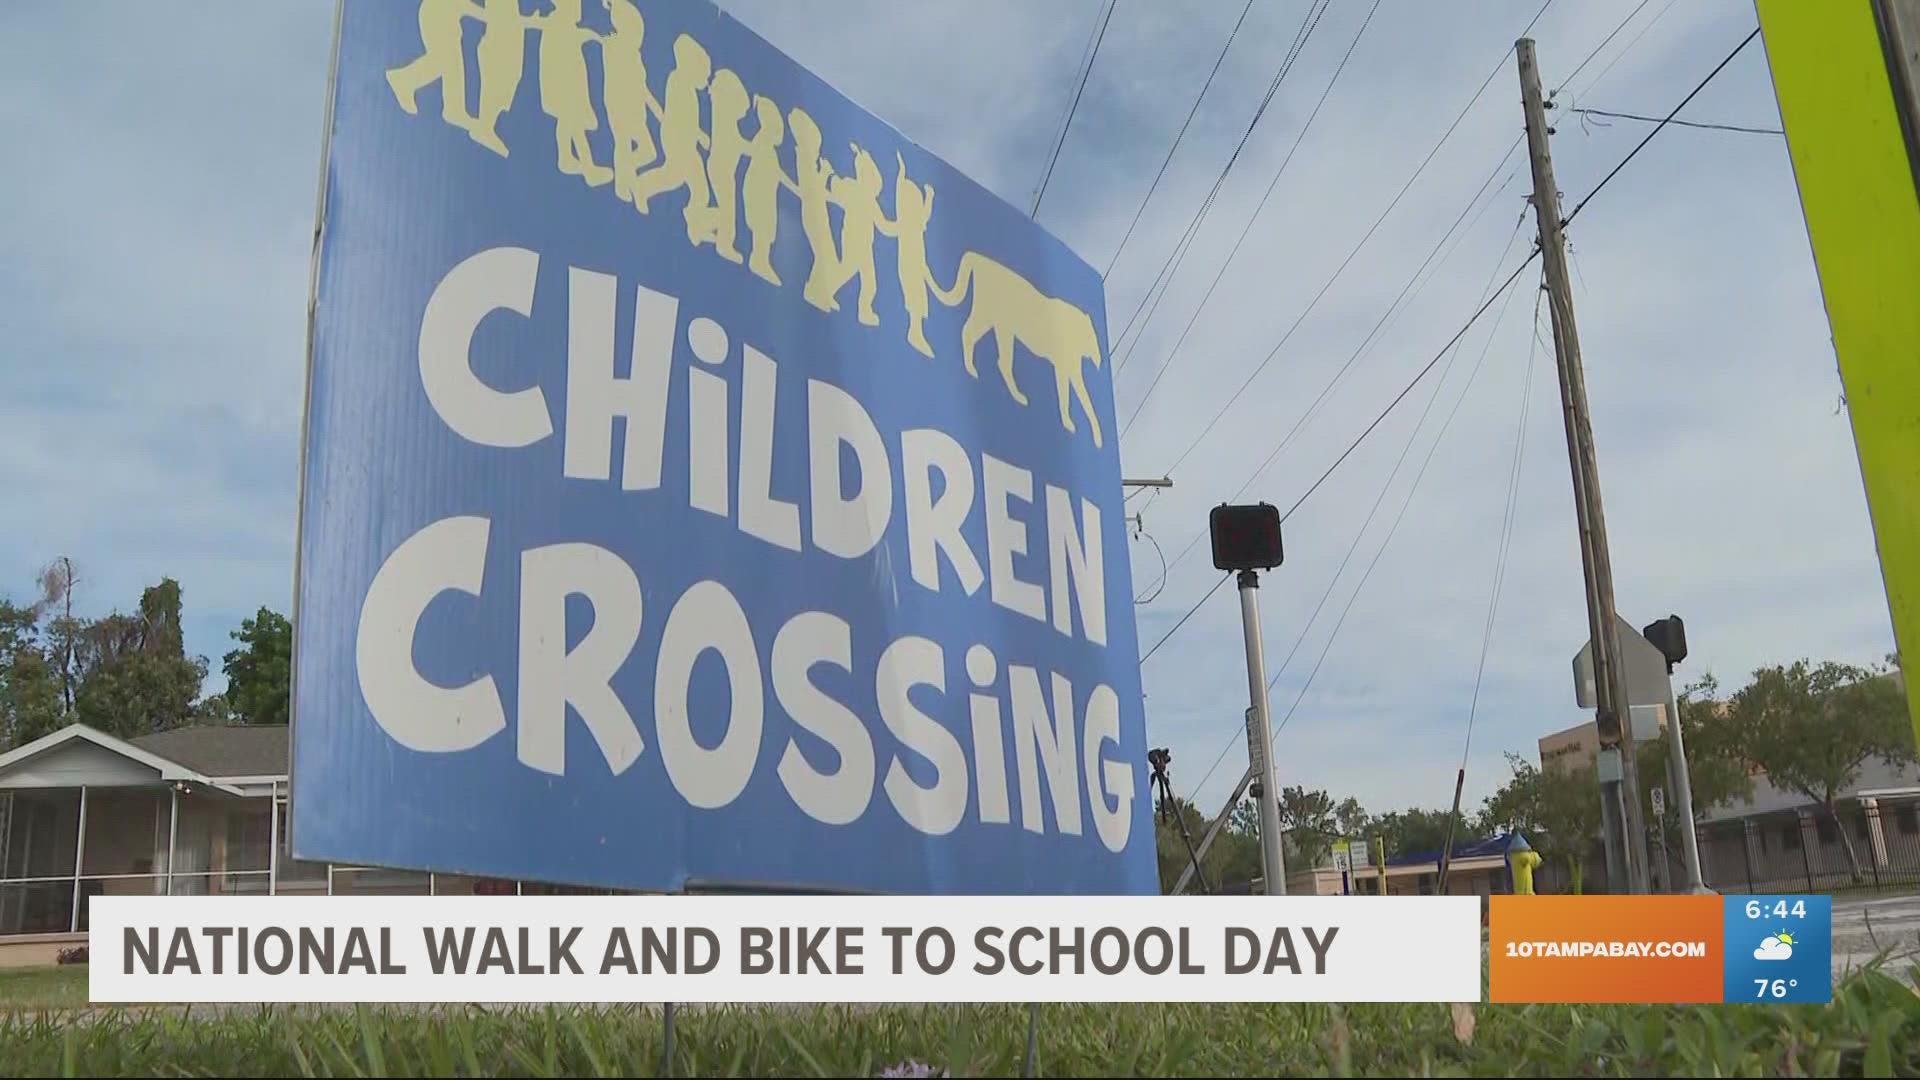 The day is meant to raise awareness about the need for safe routes to school.